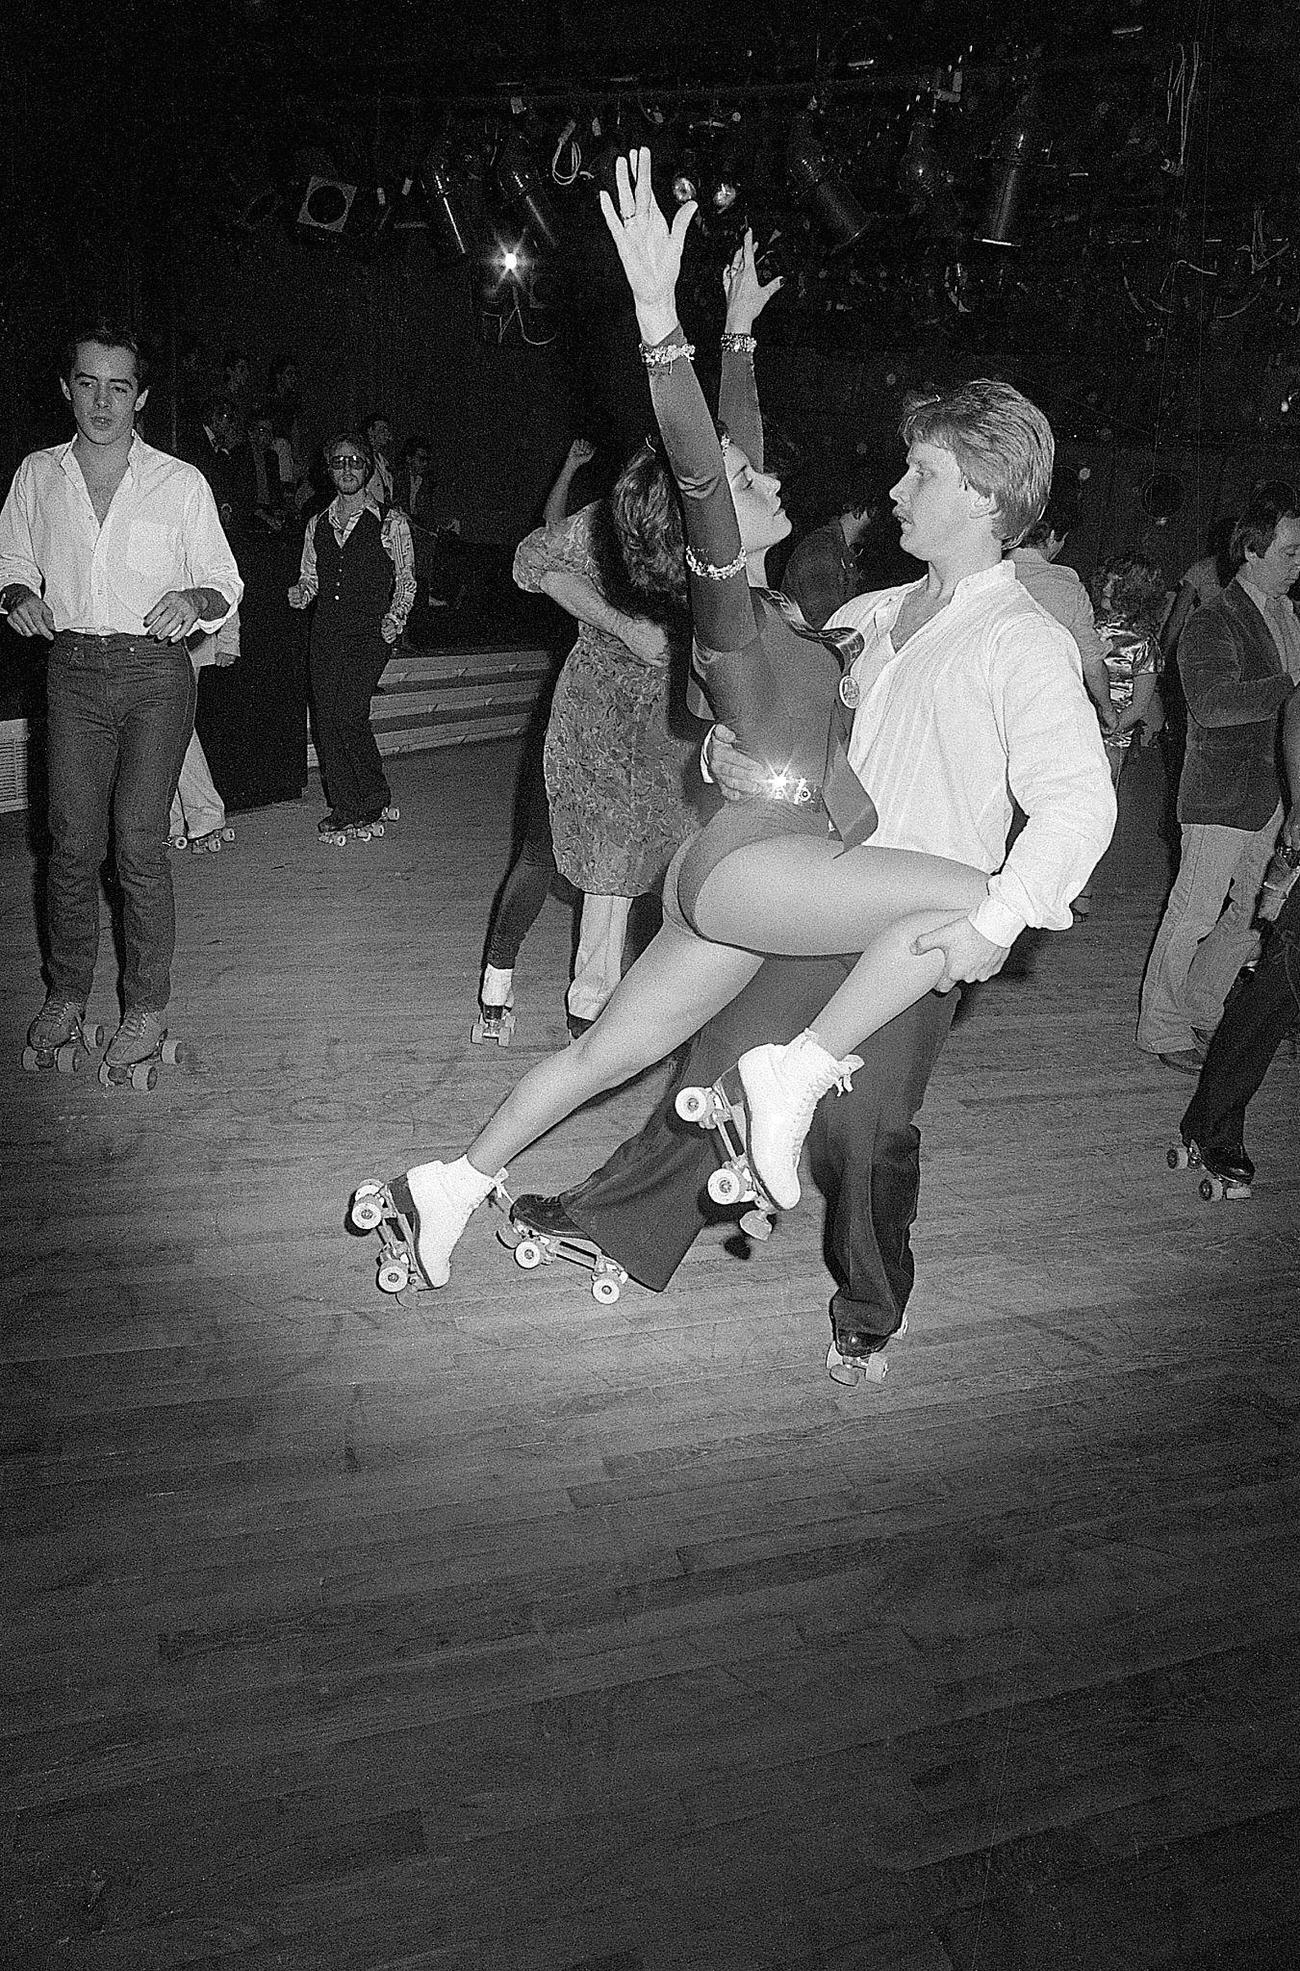 Professional Roller Disco Dancers Linda and Gary Fudge Show How It's Done, New York, 1979